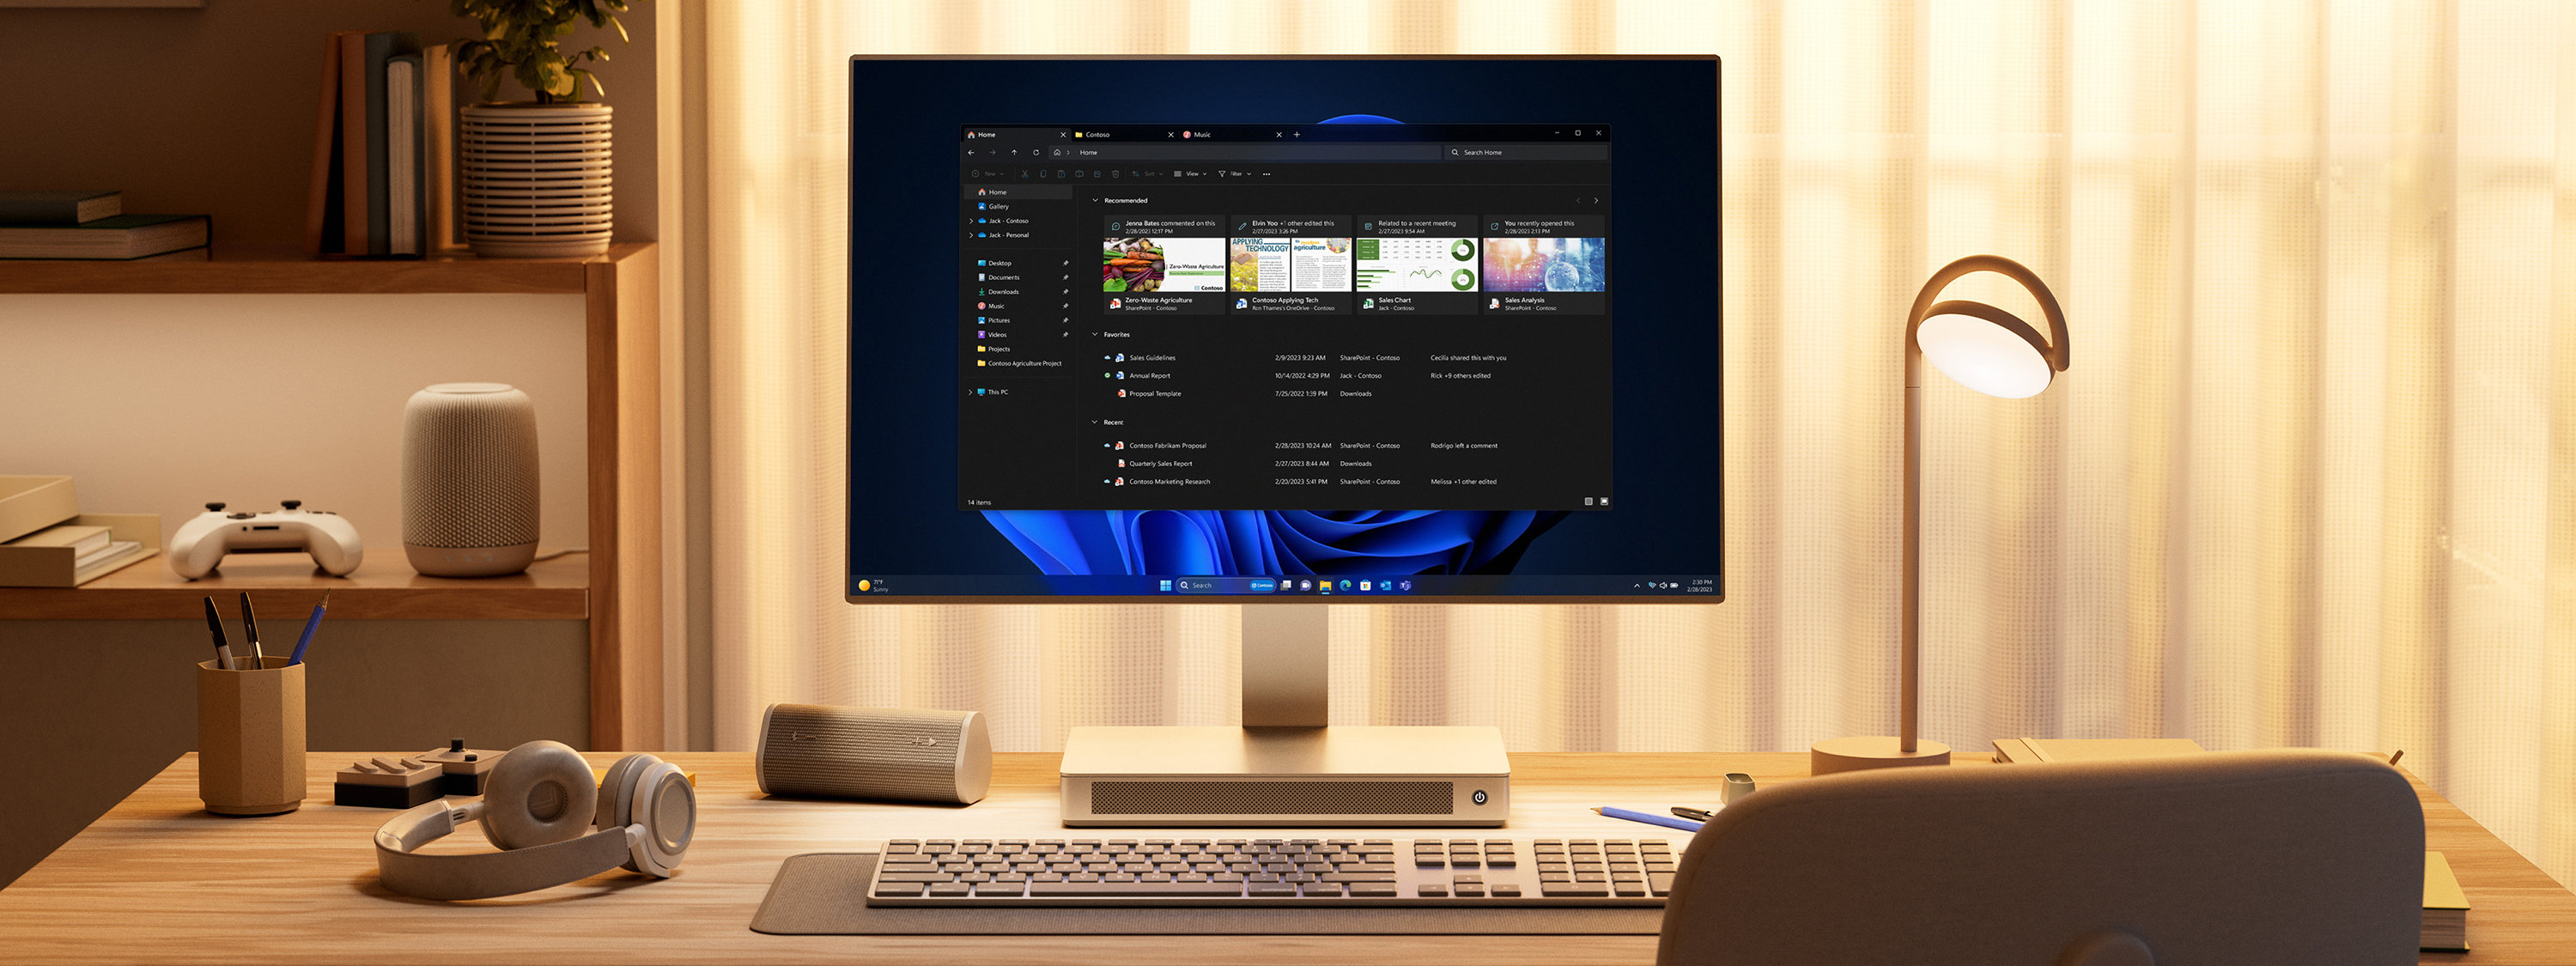 Home office with desk, keyboard and all-in-one desktop displaying File Explorer window.